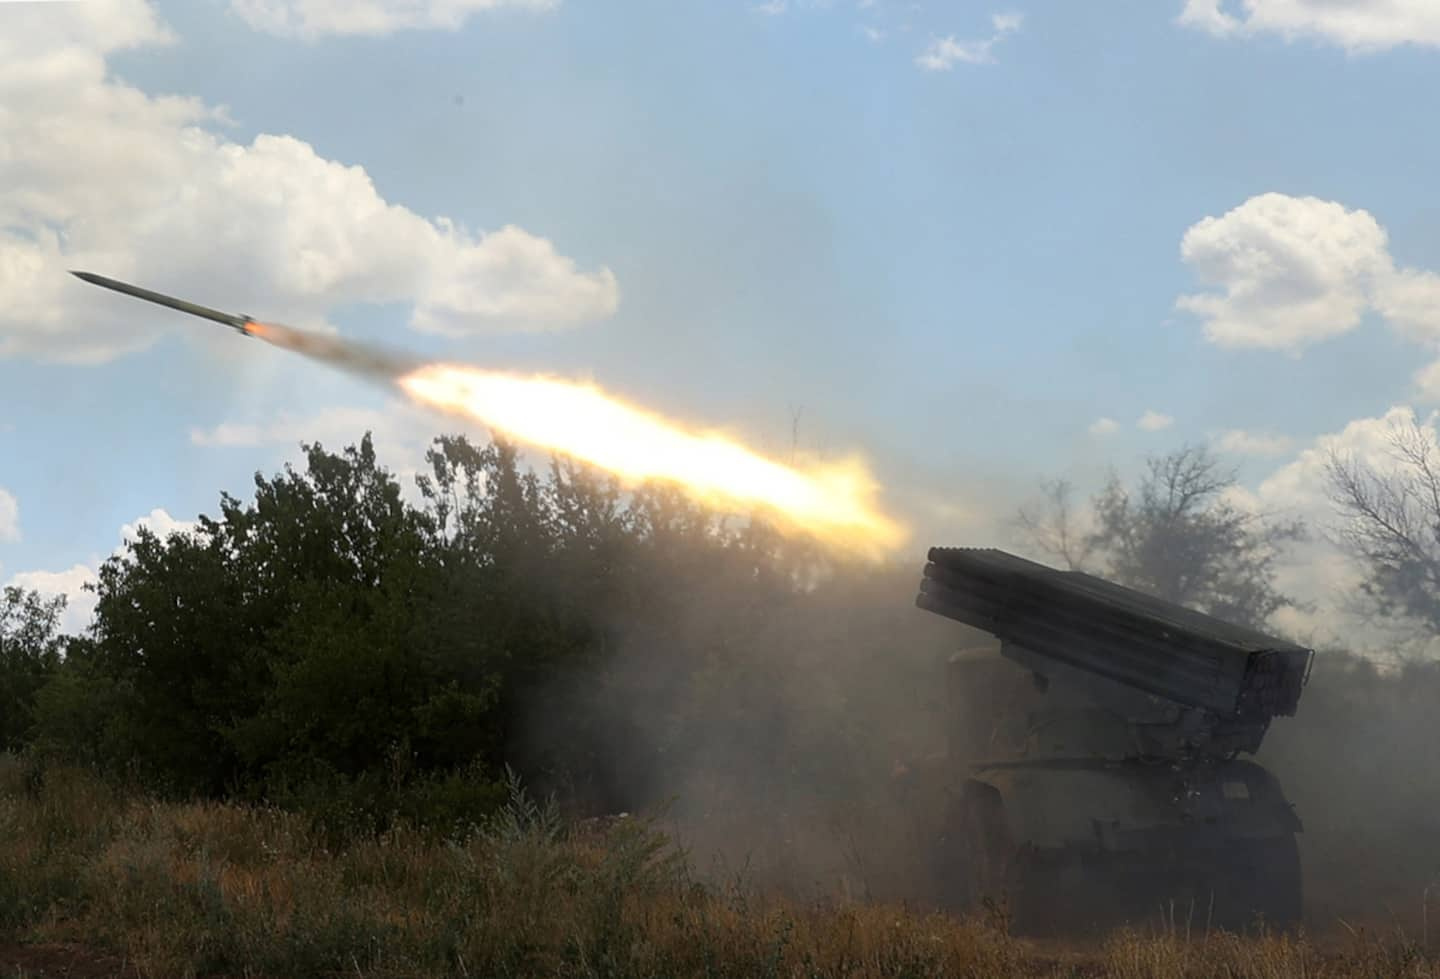 Kyiv says it has received new Western rocket launcher systems